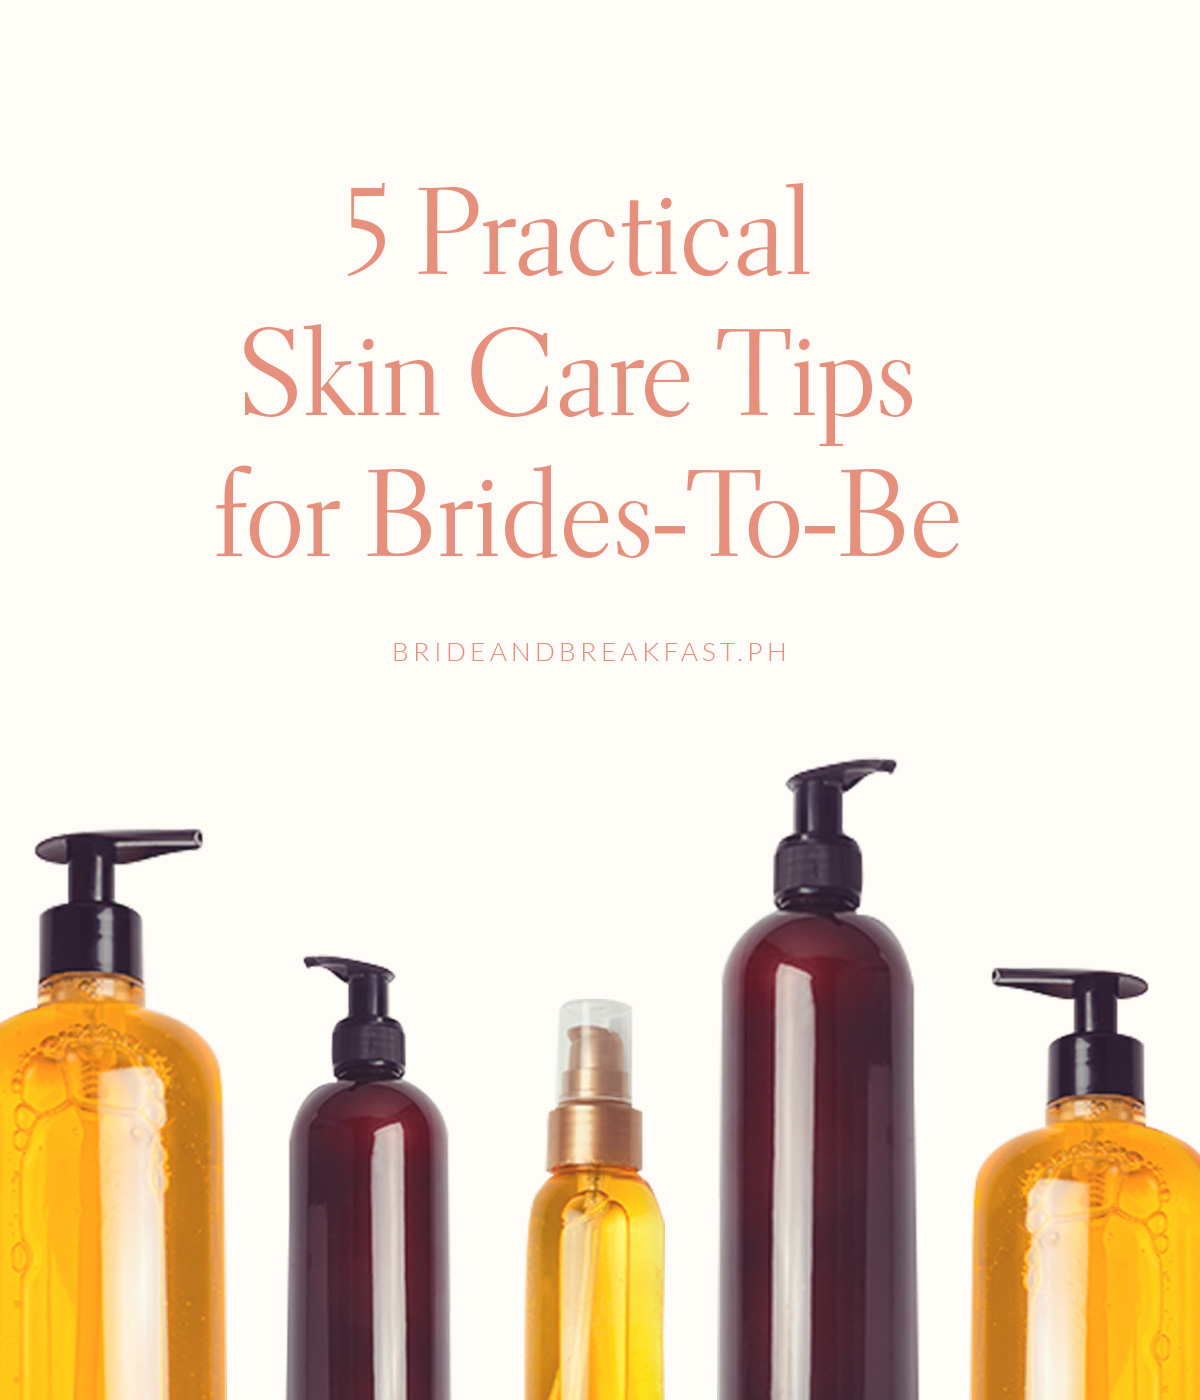 5 Practical Skin Care Tips for Brides-To-Be